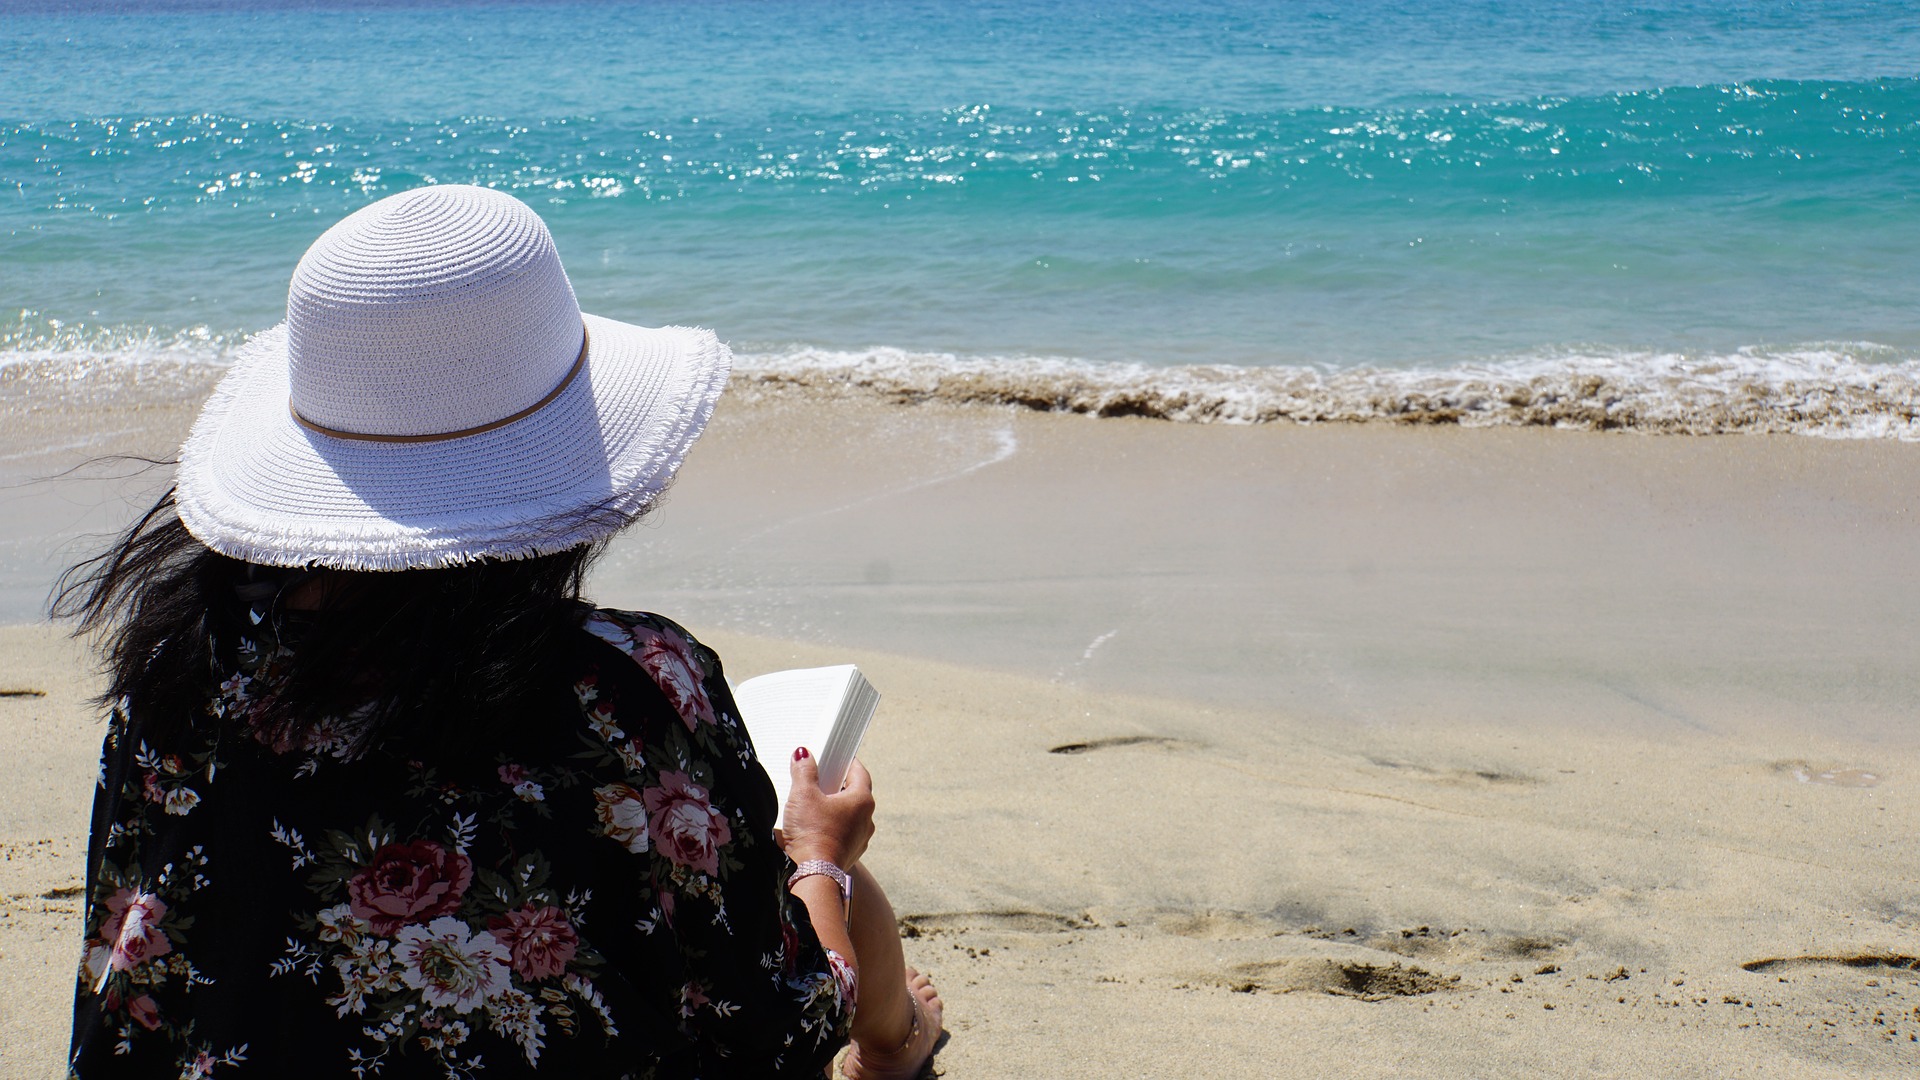 Lady reading a book on the beach in the Caribbean